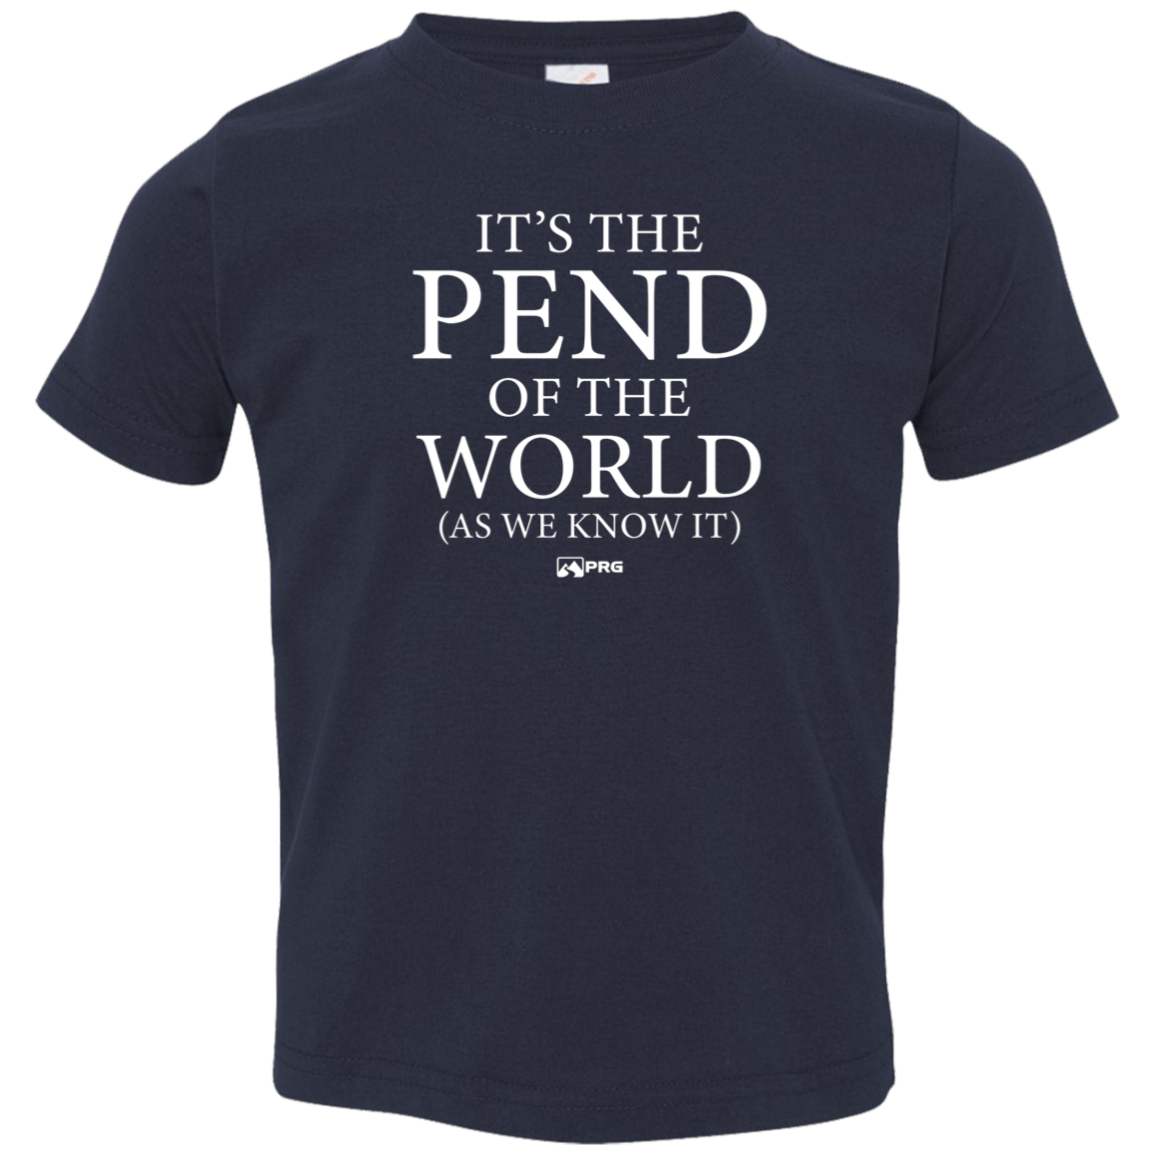 Pend of the World - Toddler Shirt